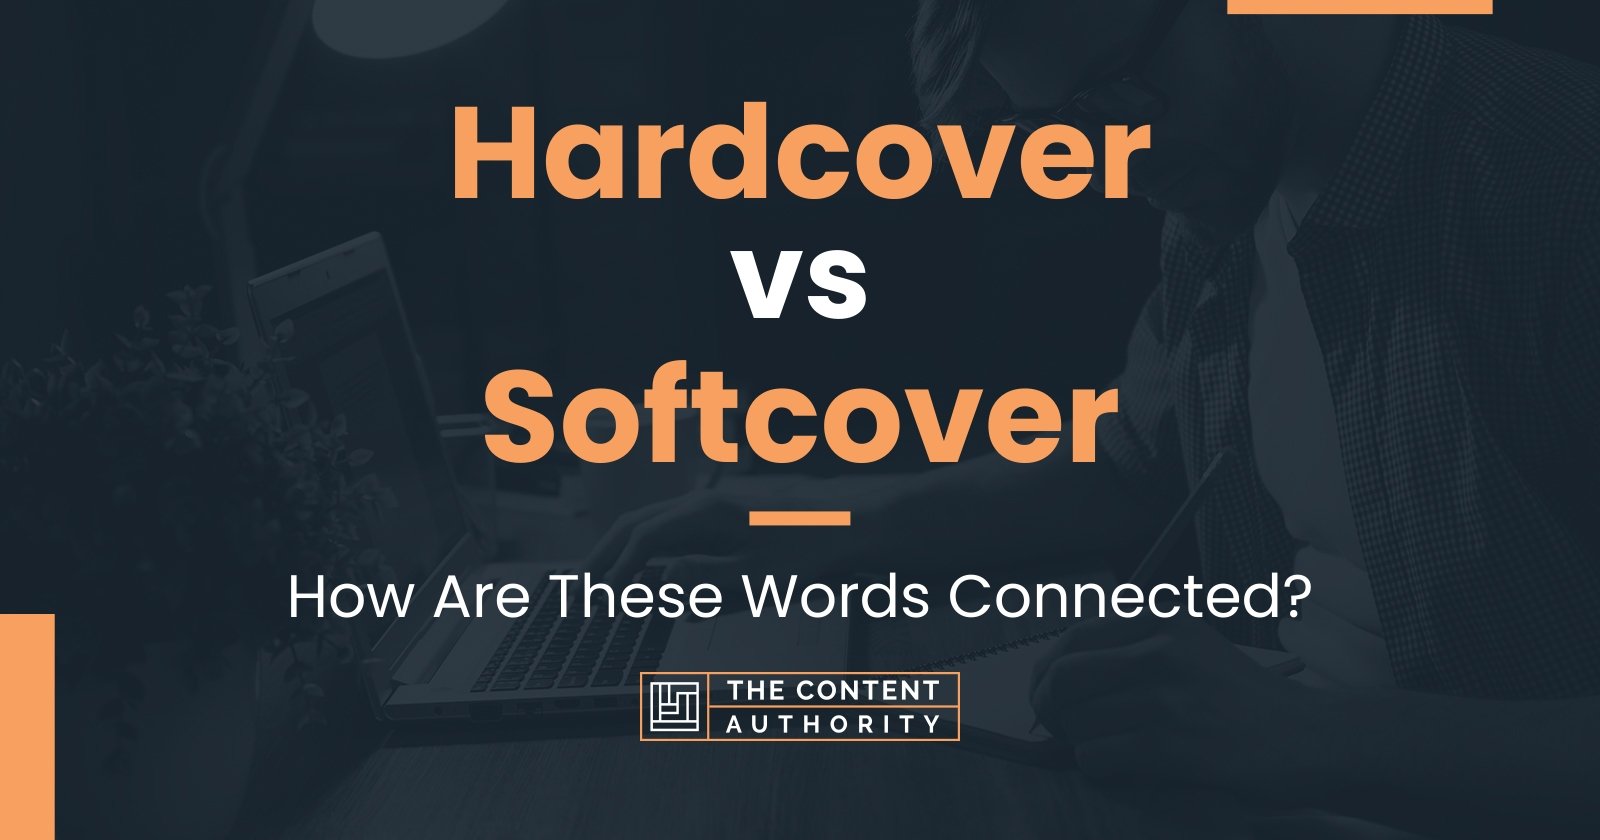 Hardcover vs Softcover: How Are These Words Connected?